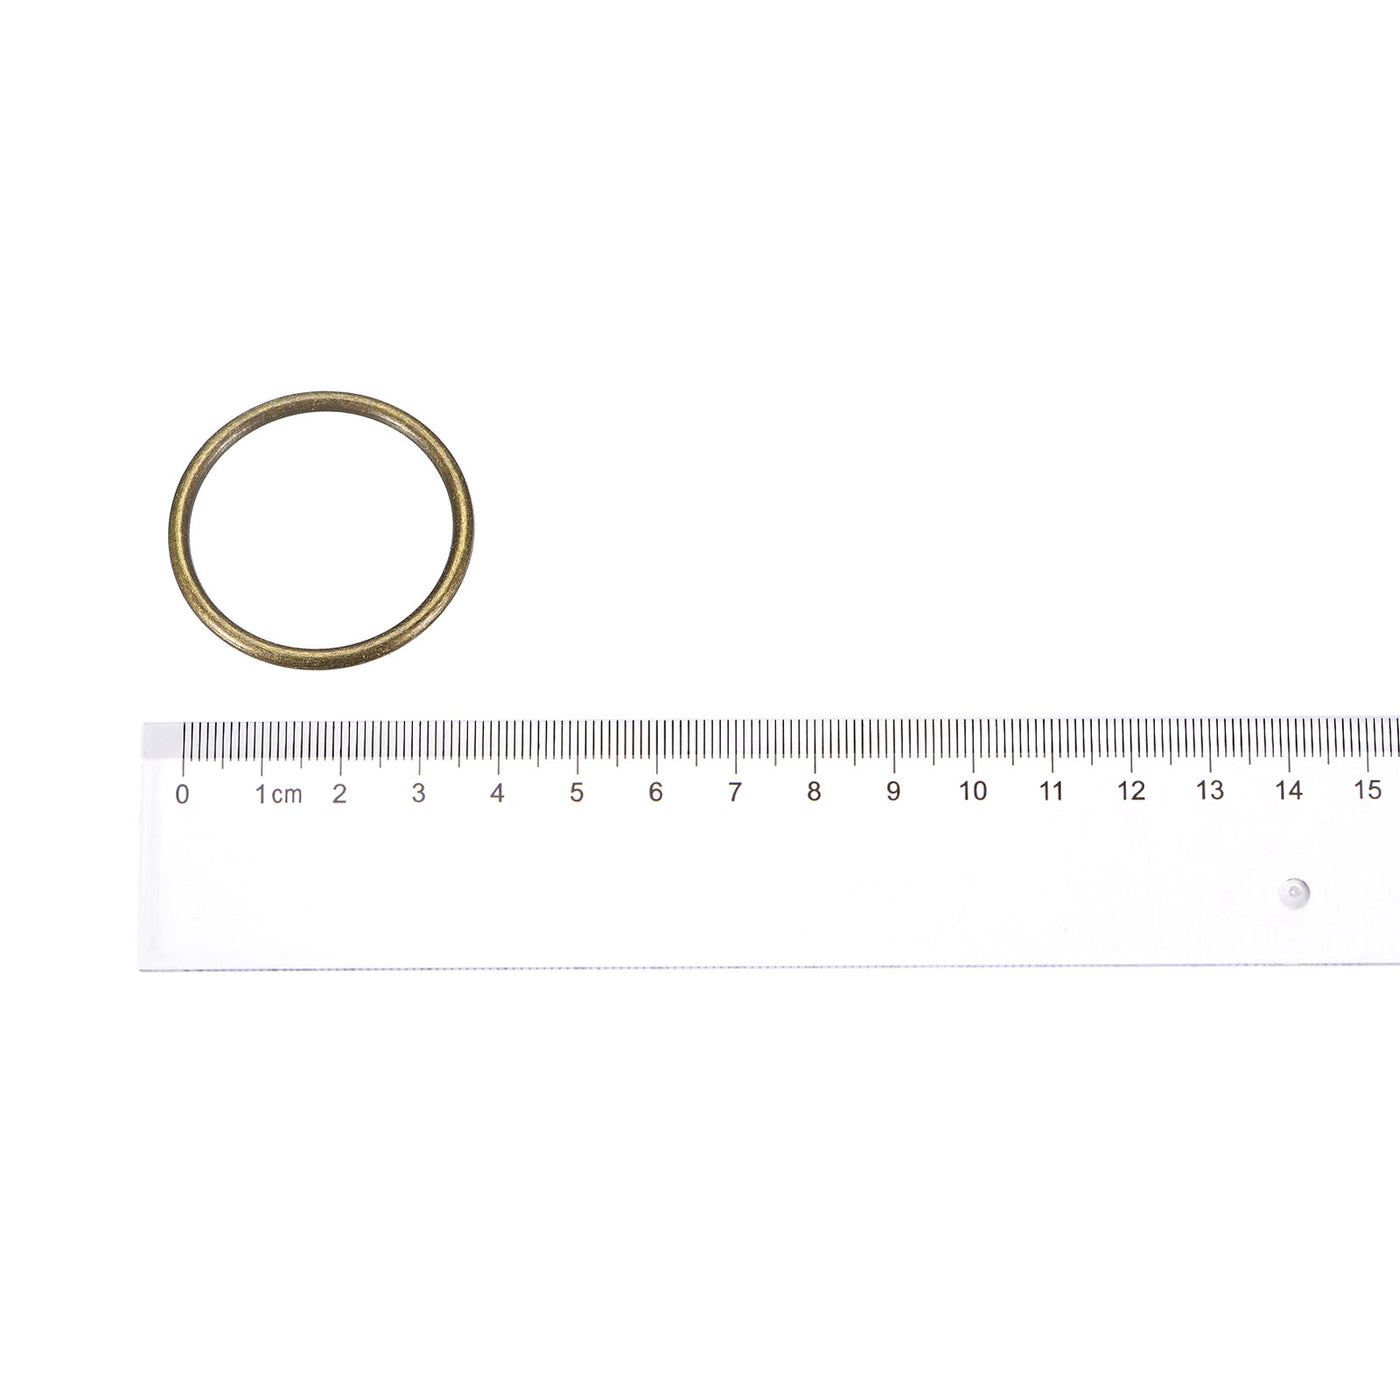 uxcell Uxcell Metal O Rings, 15pcs 35mm(1.38") ID 3mm Thick Welded O-Ringe, Bronze Tone